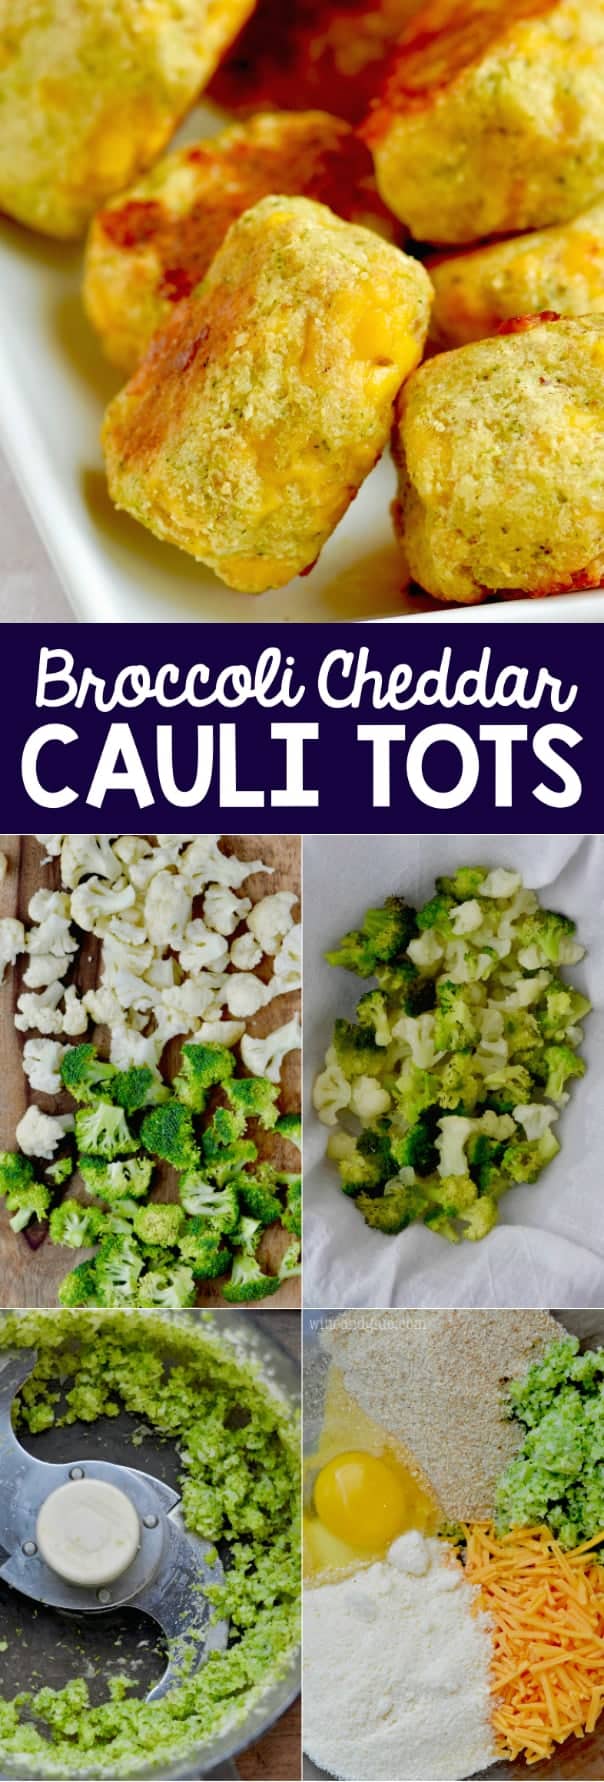 A collage of photos on how to make the Broccoli Cheddar Cauliflower Tator Tot by steaming then chopping the broccoli and cauliflower. 